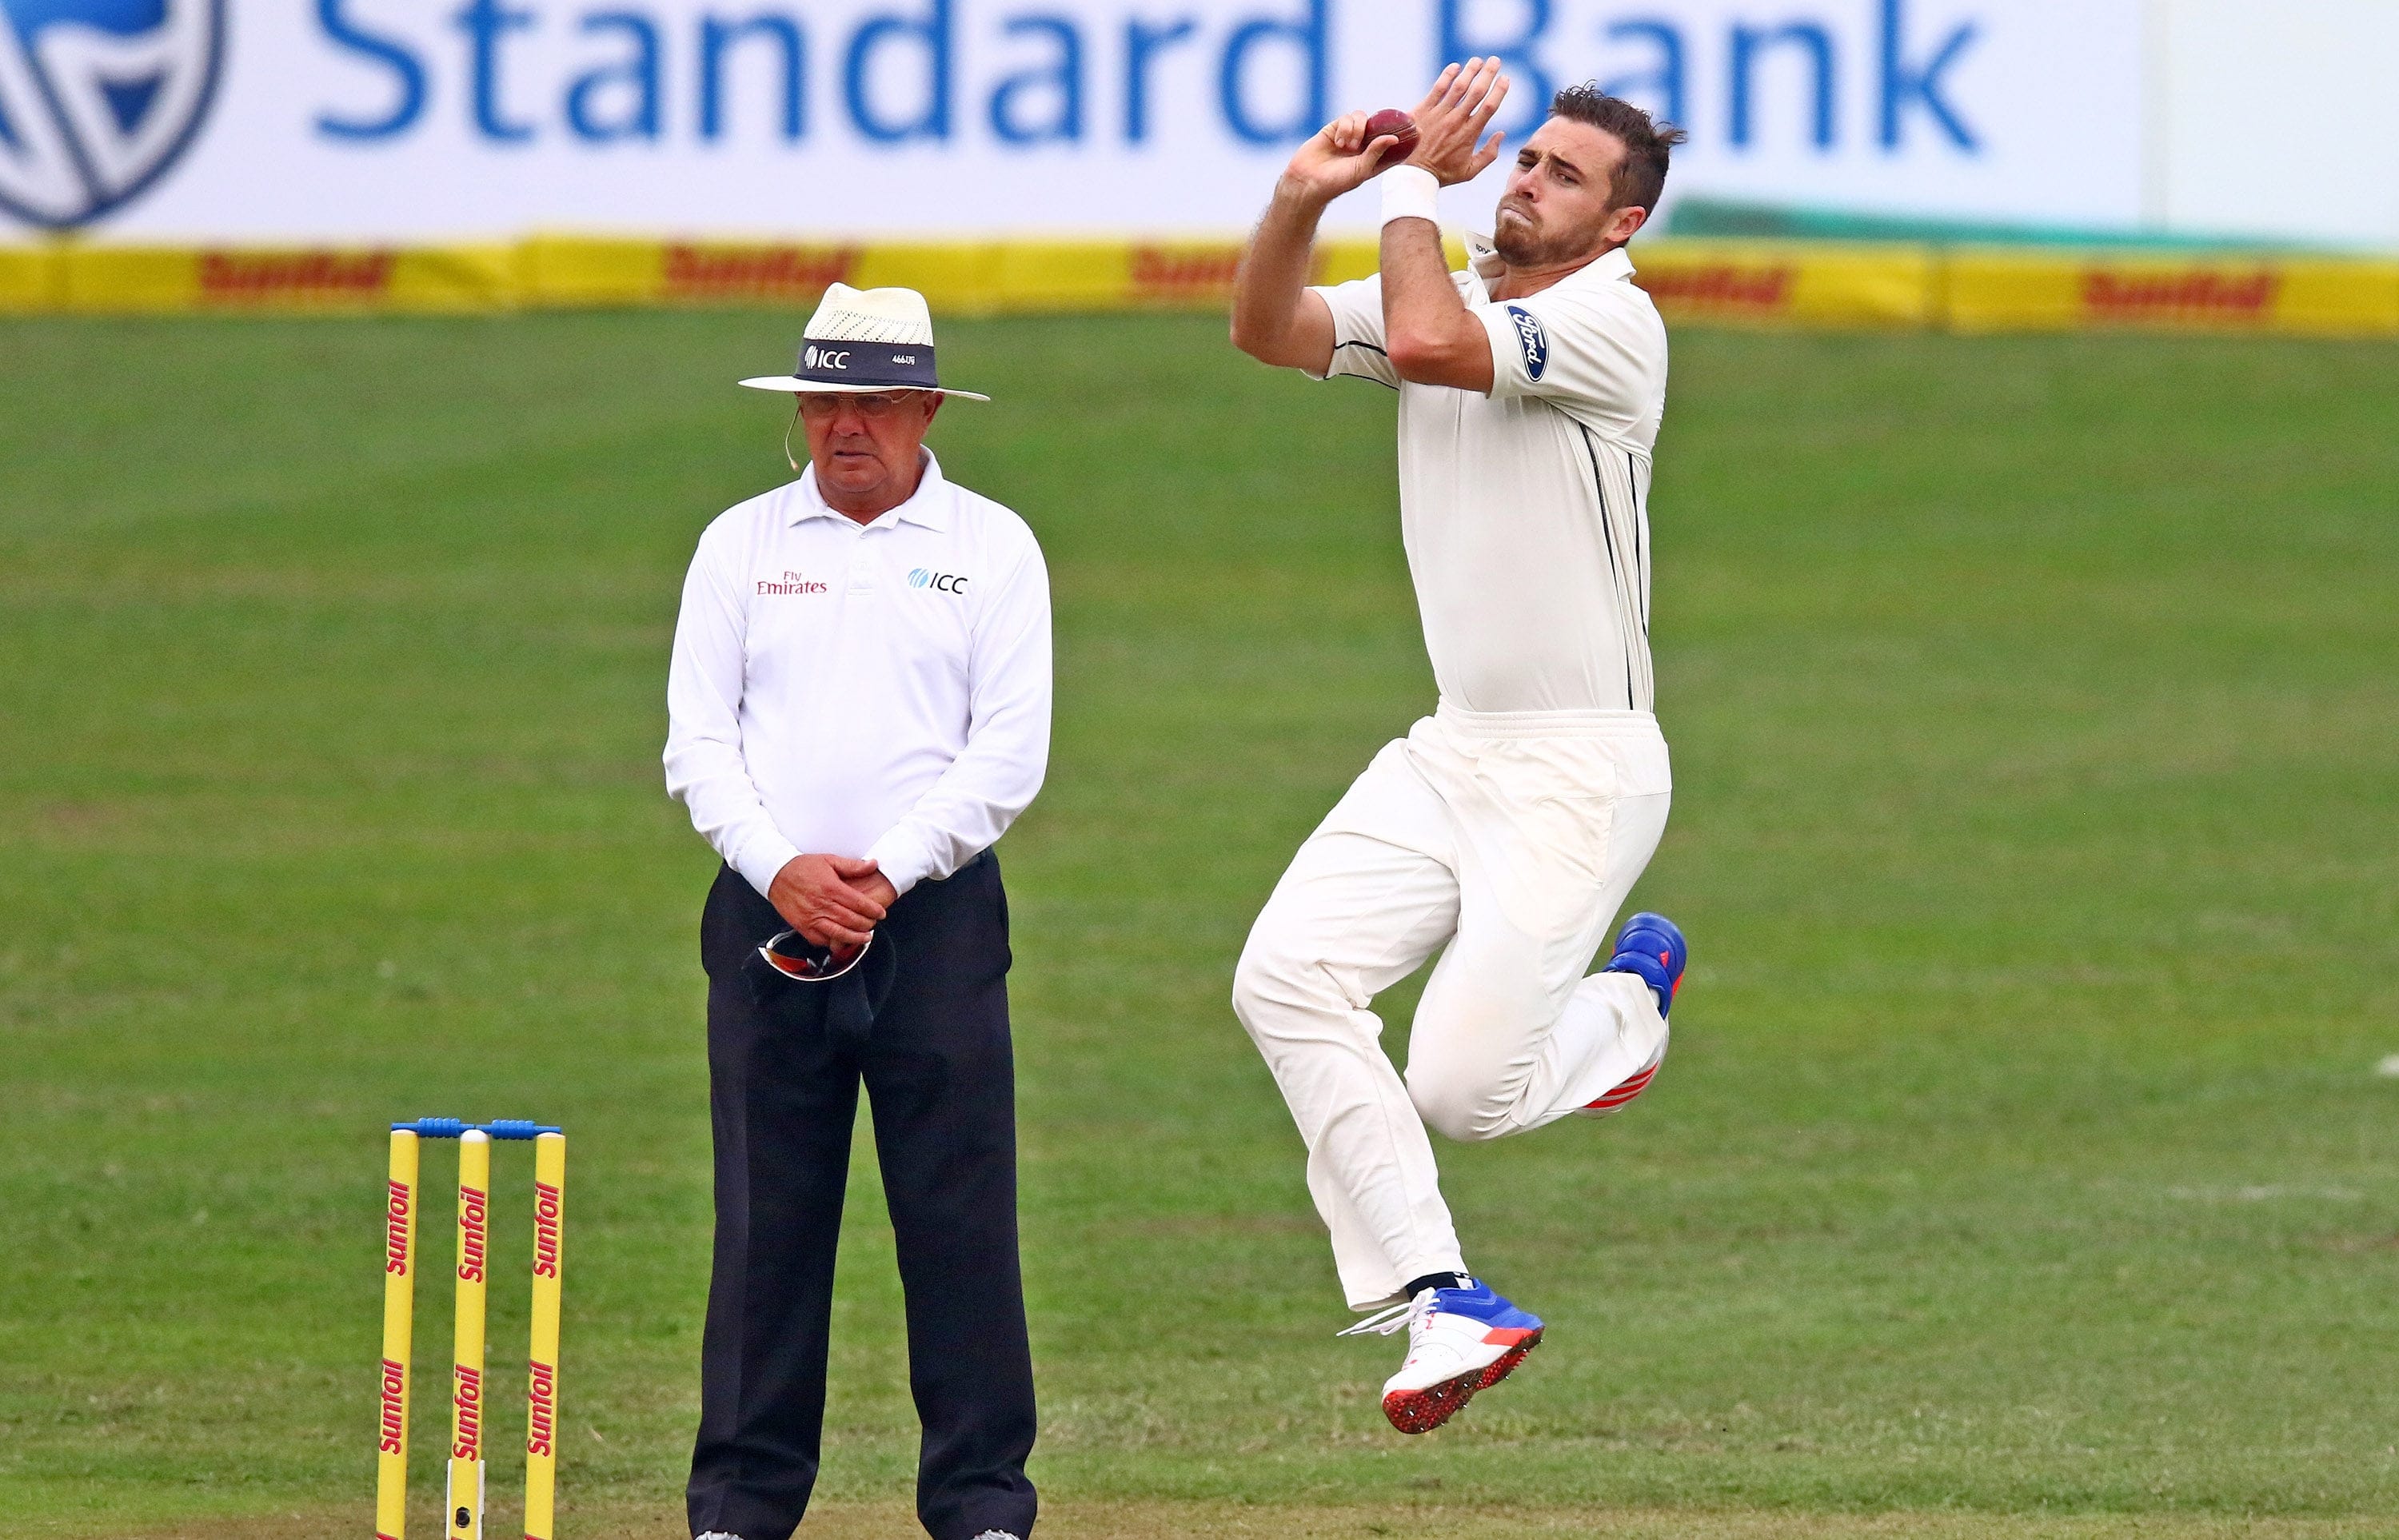 Tim Southee during day one of the first test match between South Africa and New Zealand